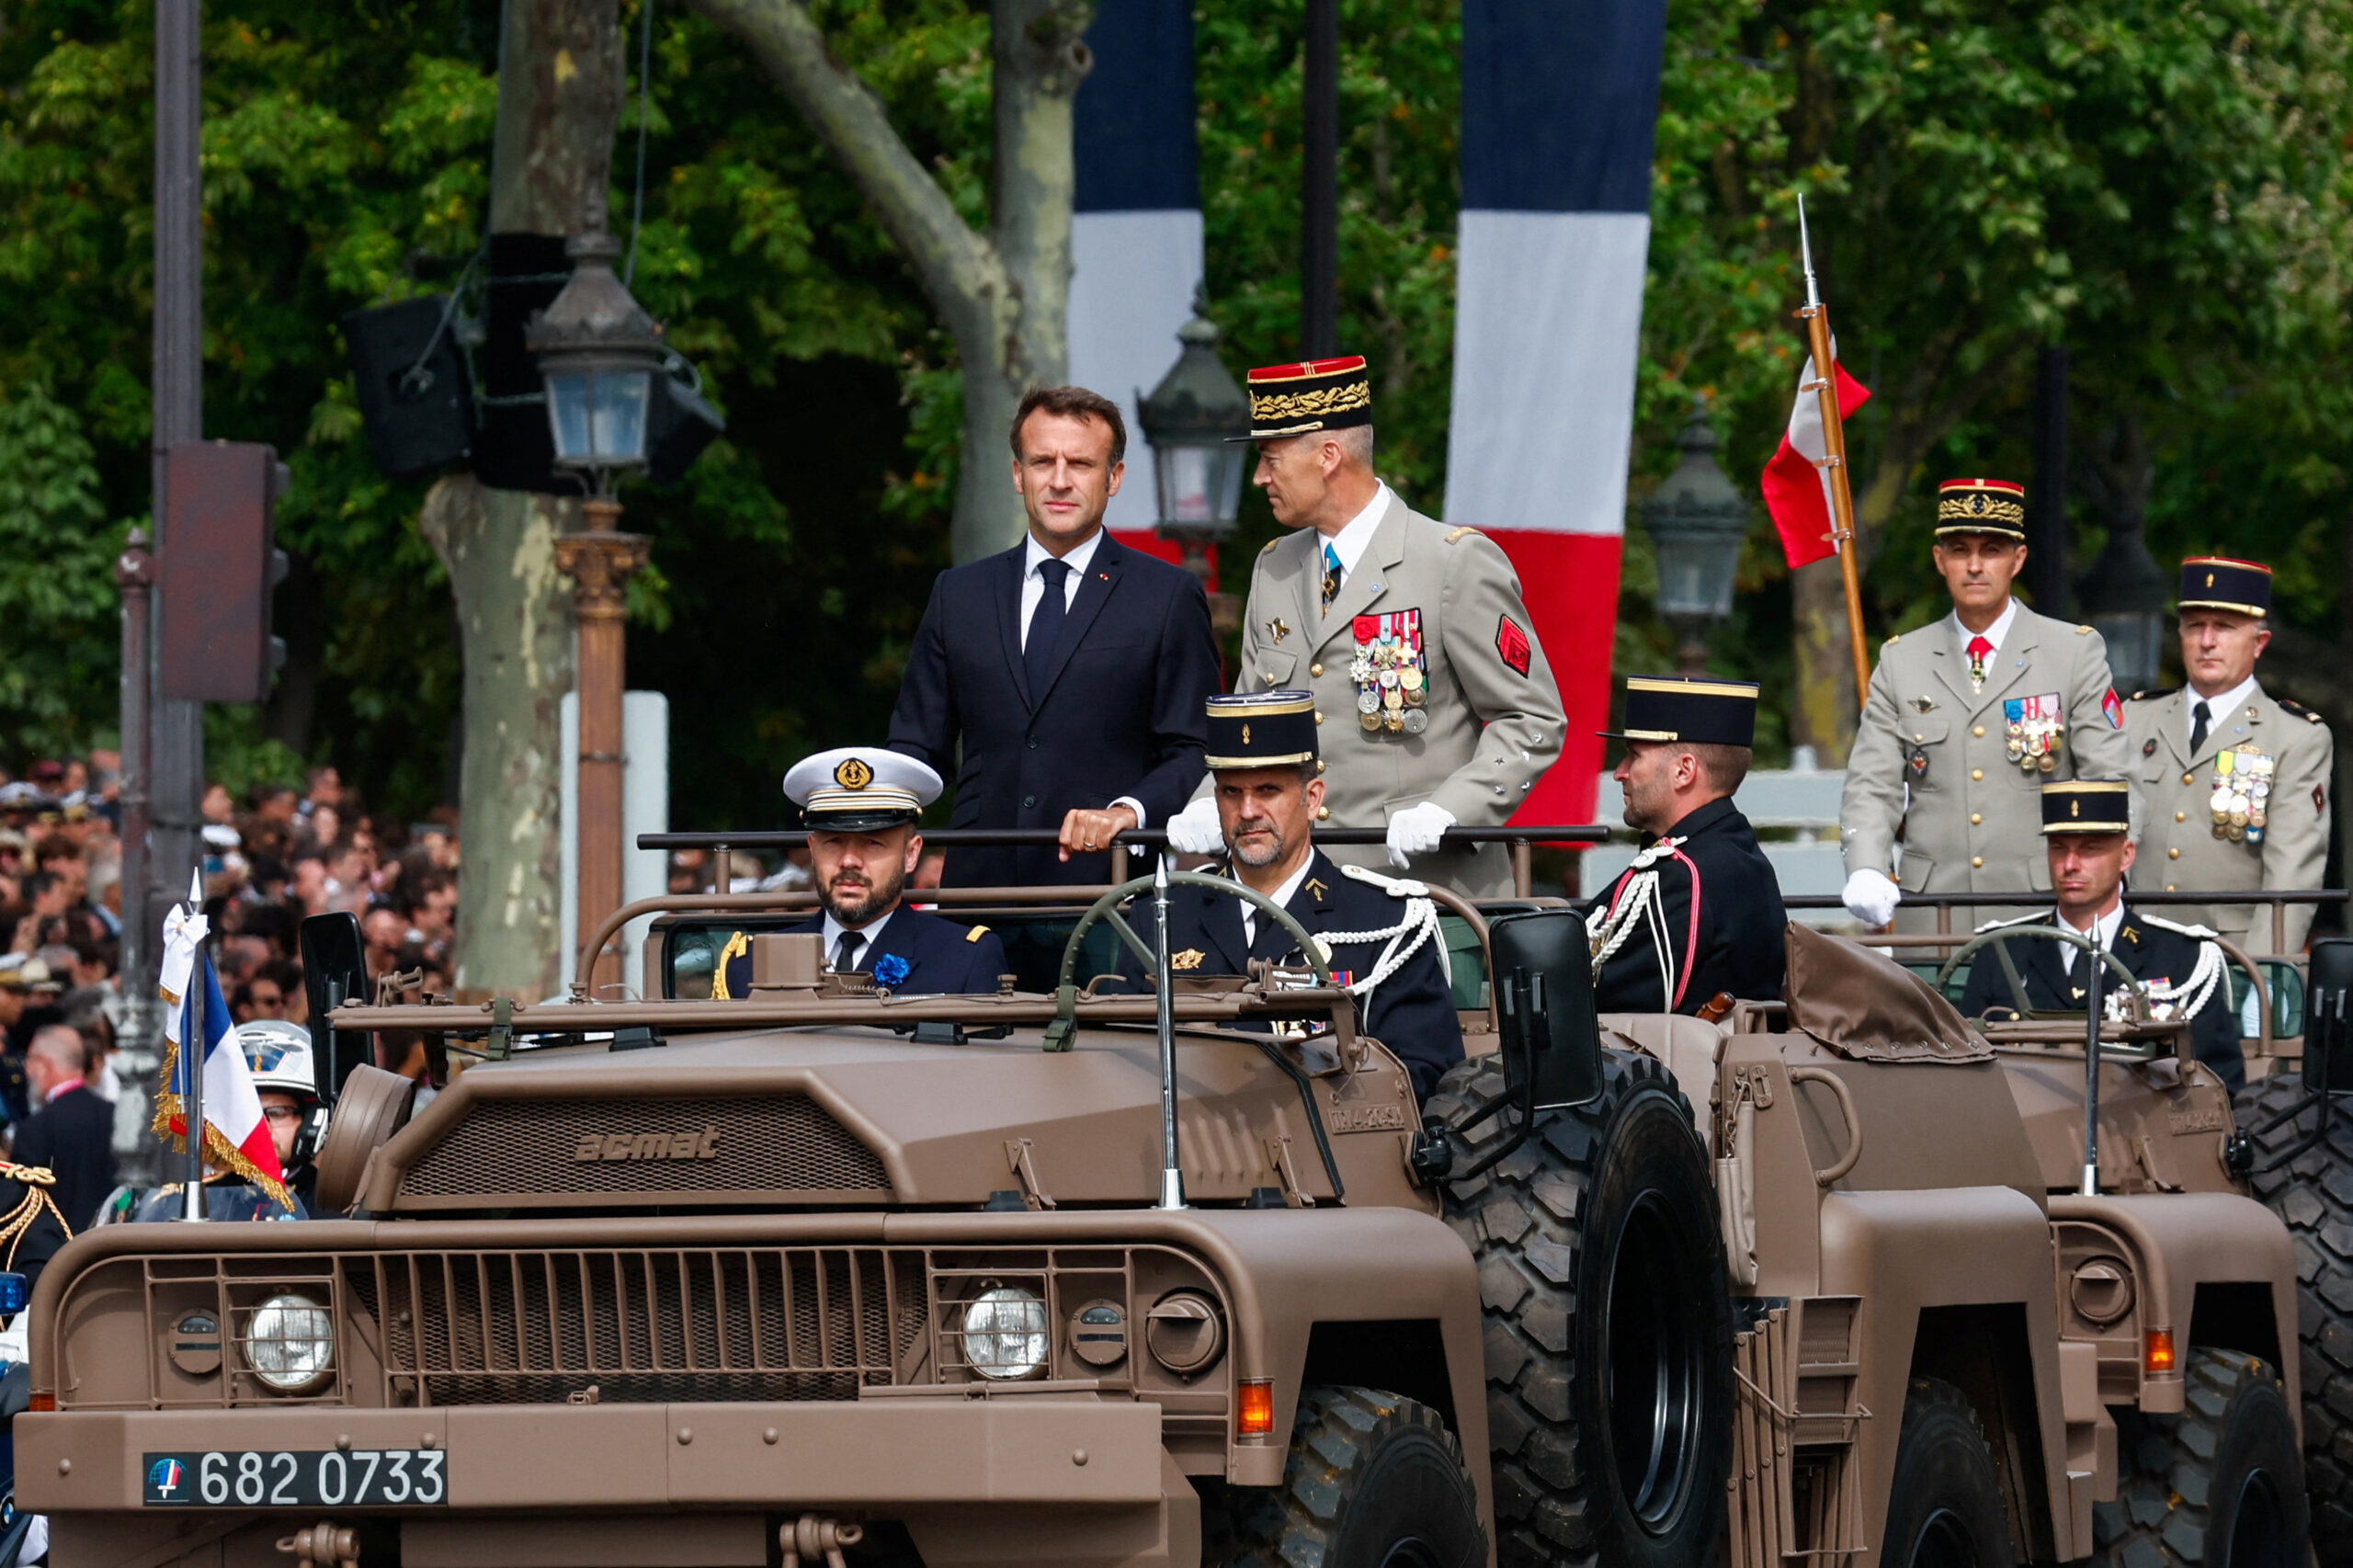 French President Emmanuel Macron (center left) and Chief of the Defence Staff Thierry Burkhard stand in the command car during the Bastille Day military parade on the Champs-Élysées avenue in Paris on July 14, 2023. <em>Photo by GONZALO FUENTES/POOL/AFP via Getty Images</em>